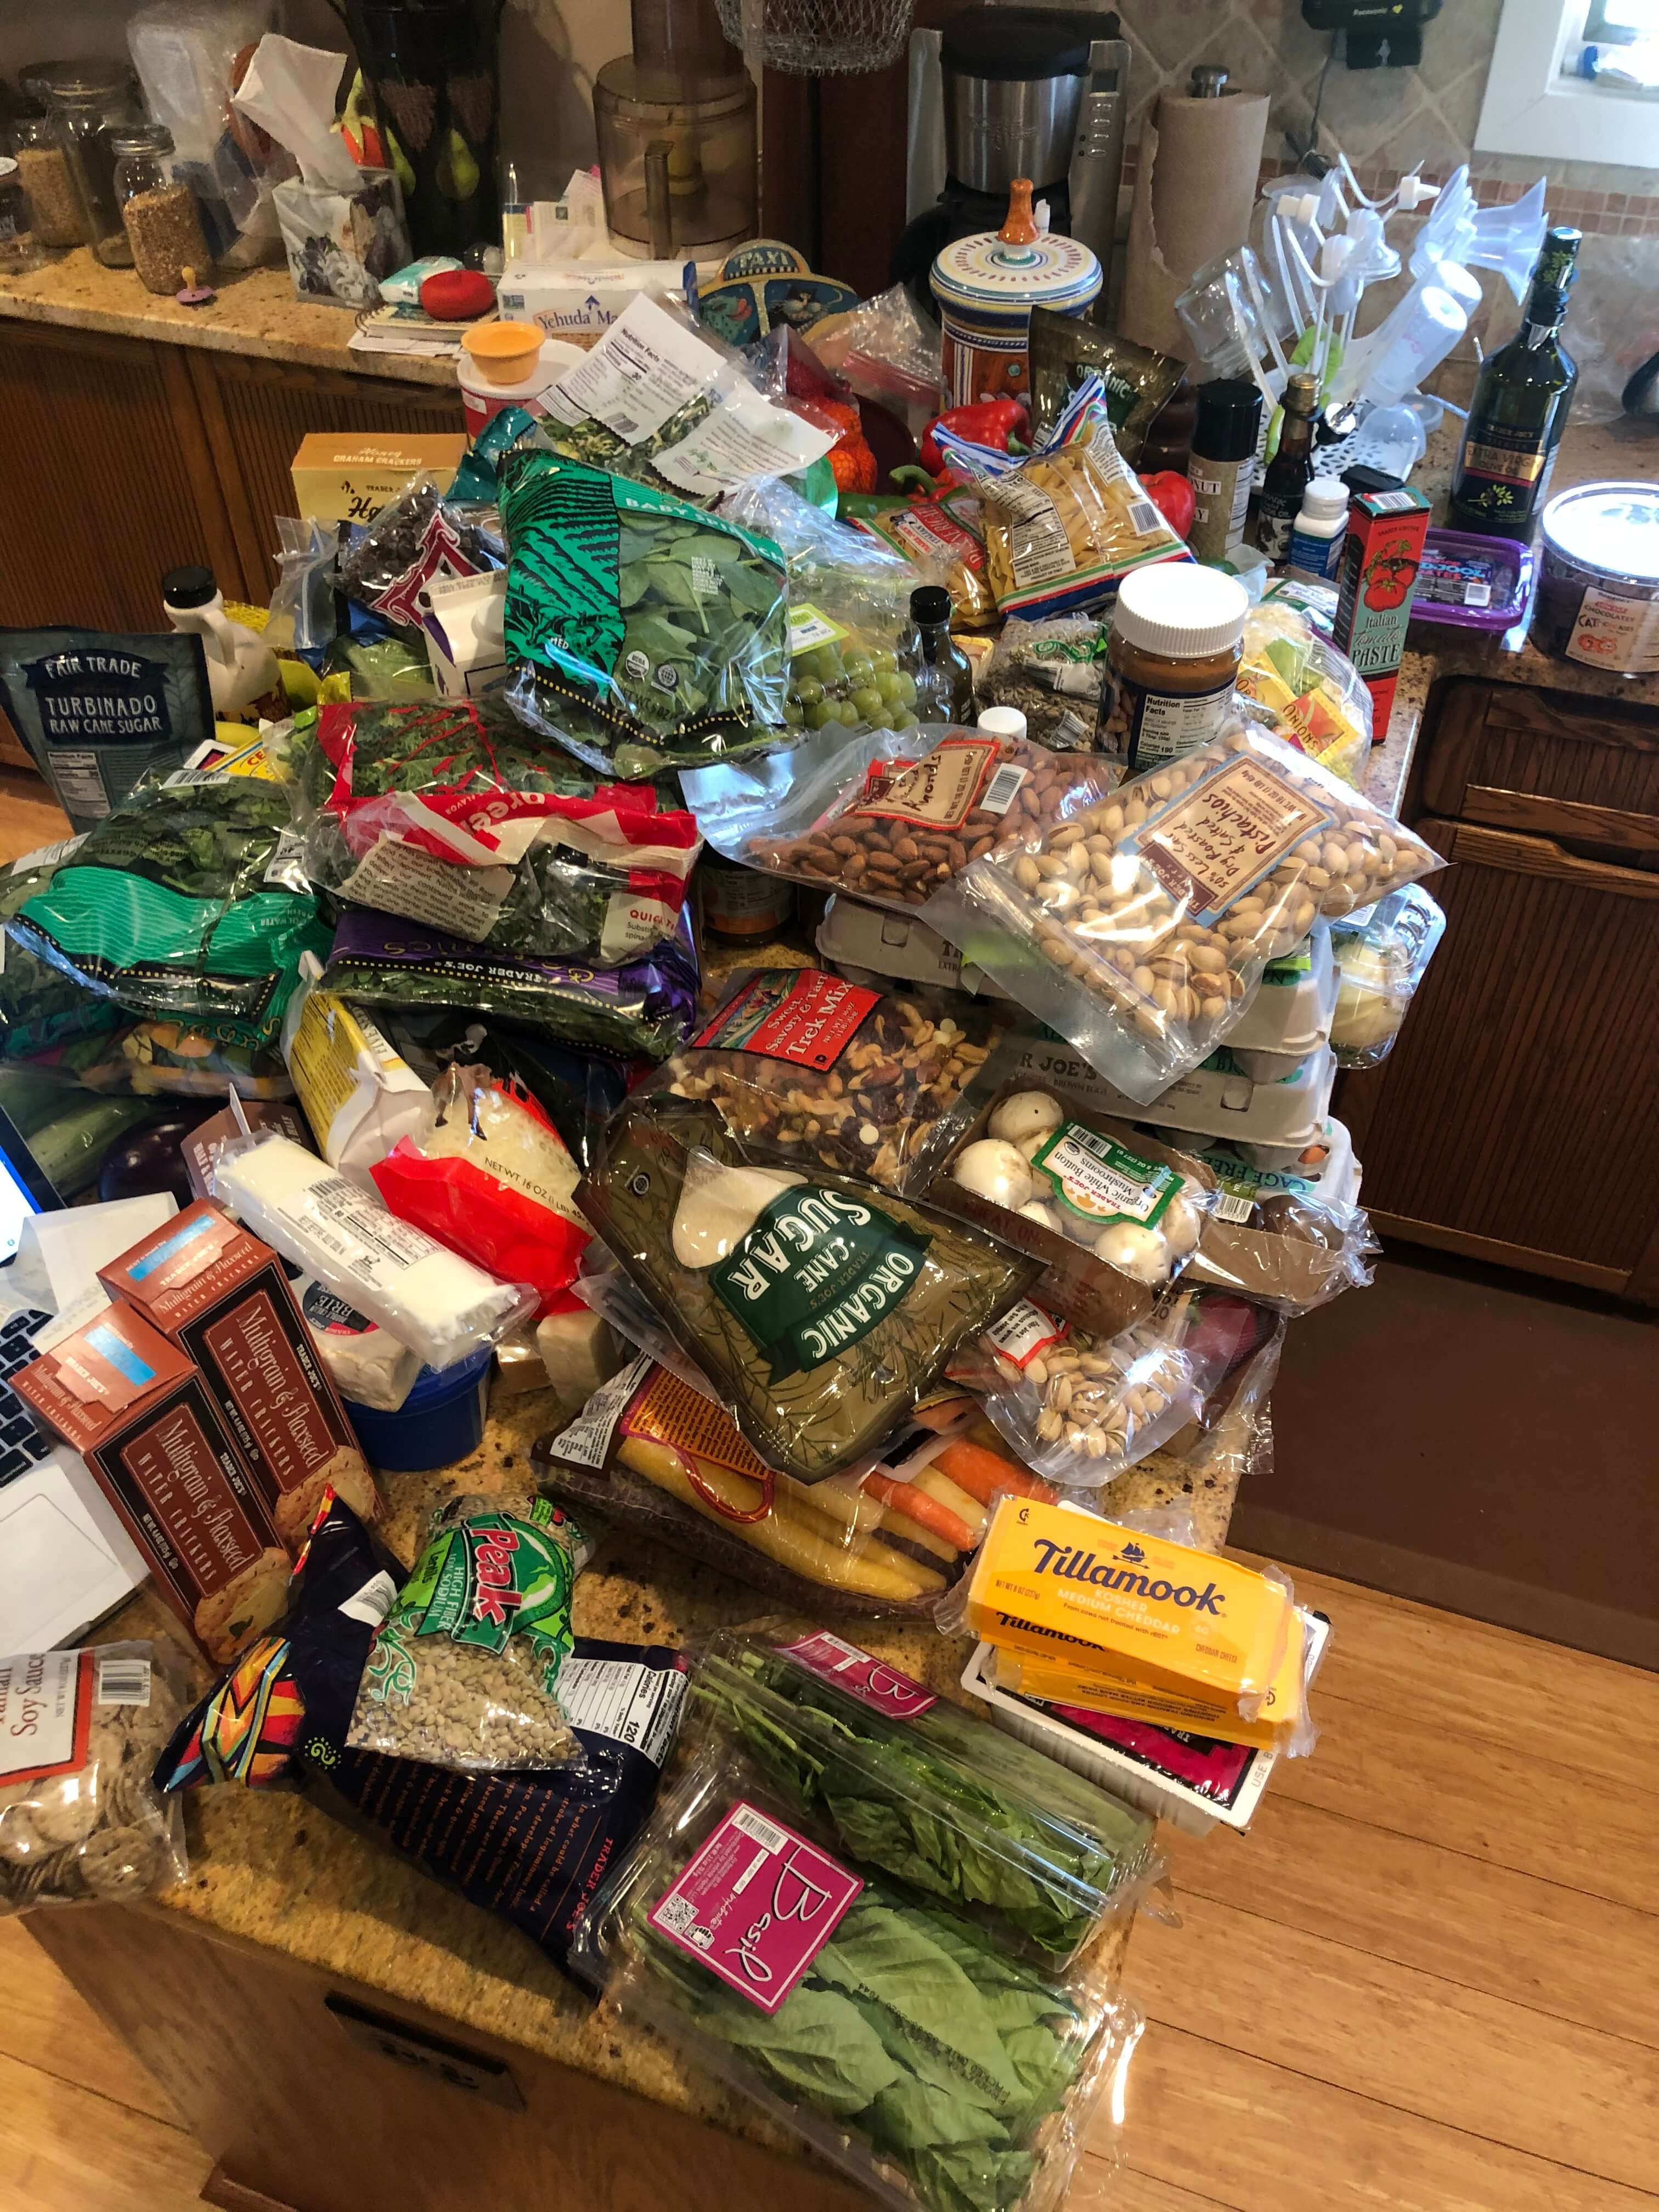 Kitchen table piled with grocery items from Trader Joe's. (June 2020)